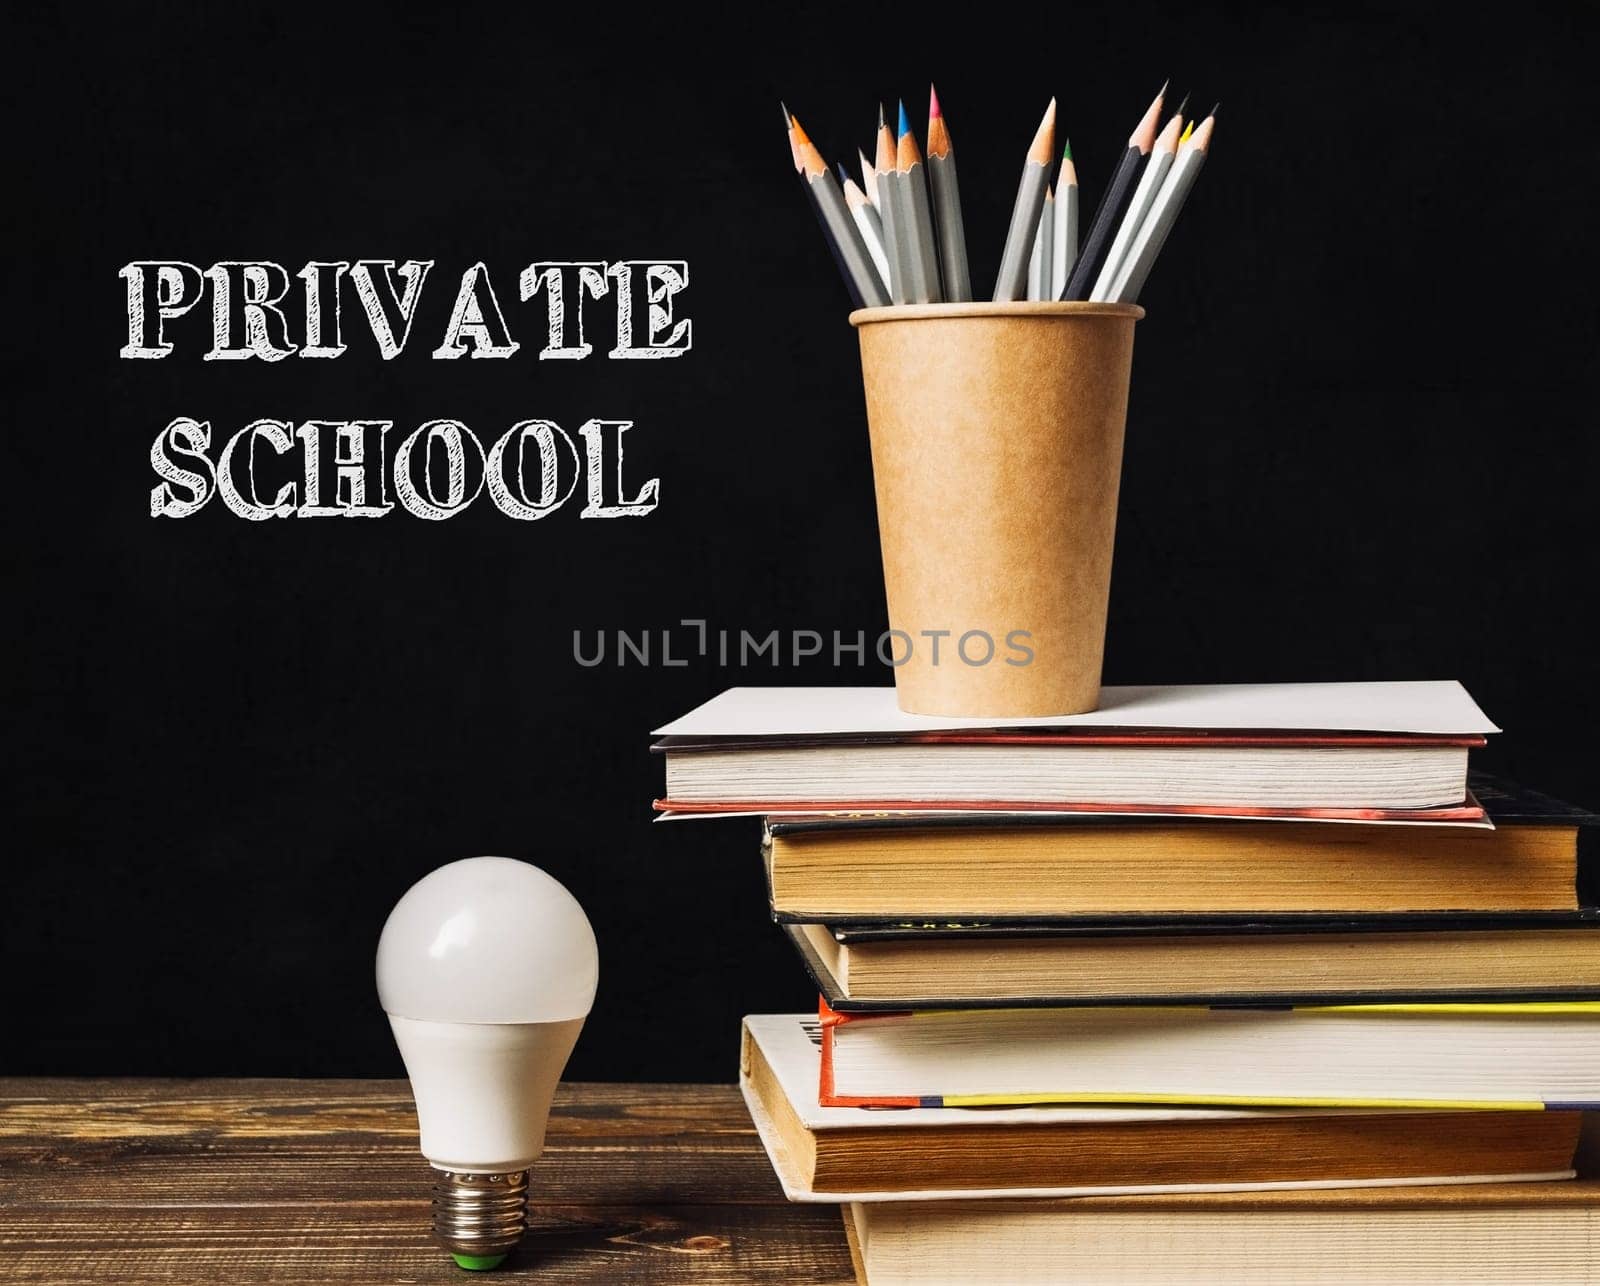 A stack of books and a light bulb on a table with the words Private School written on the table